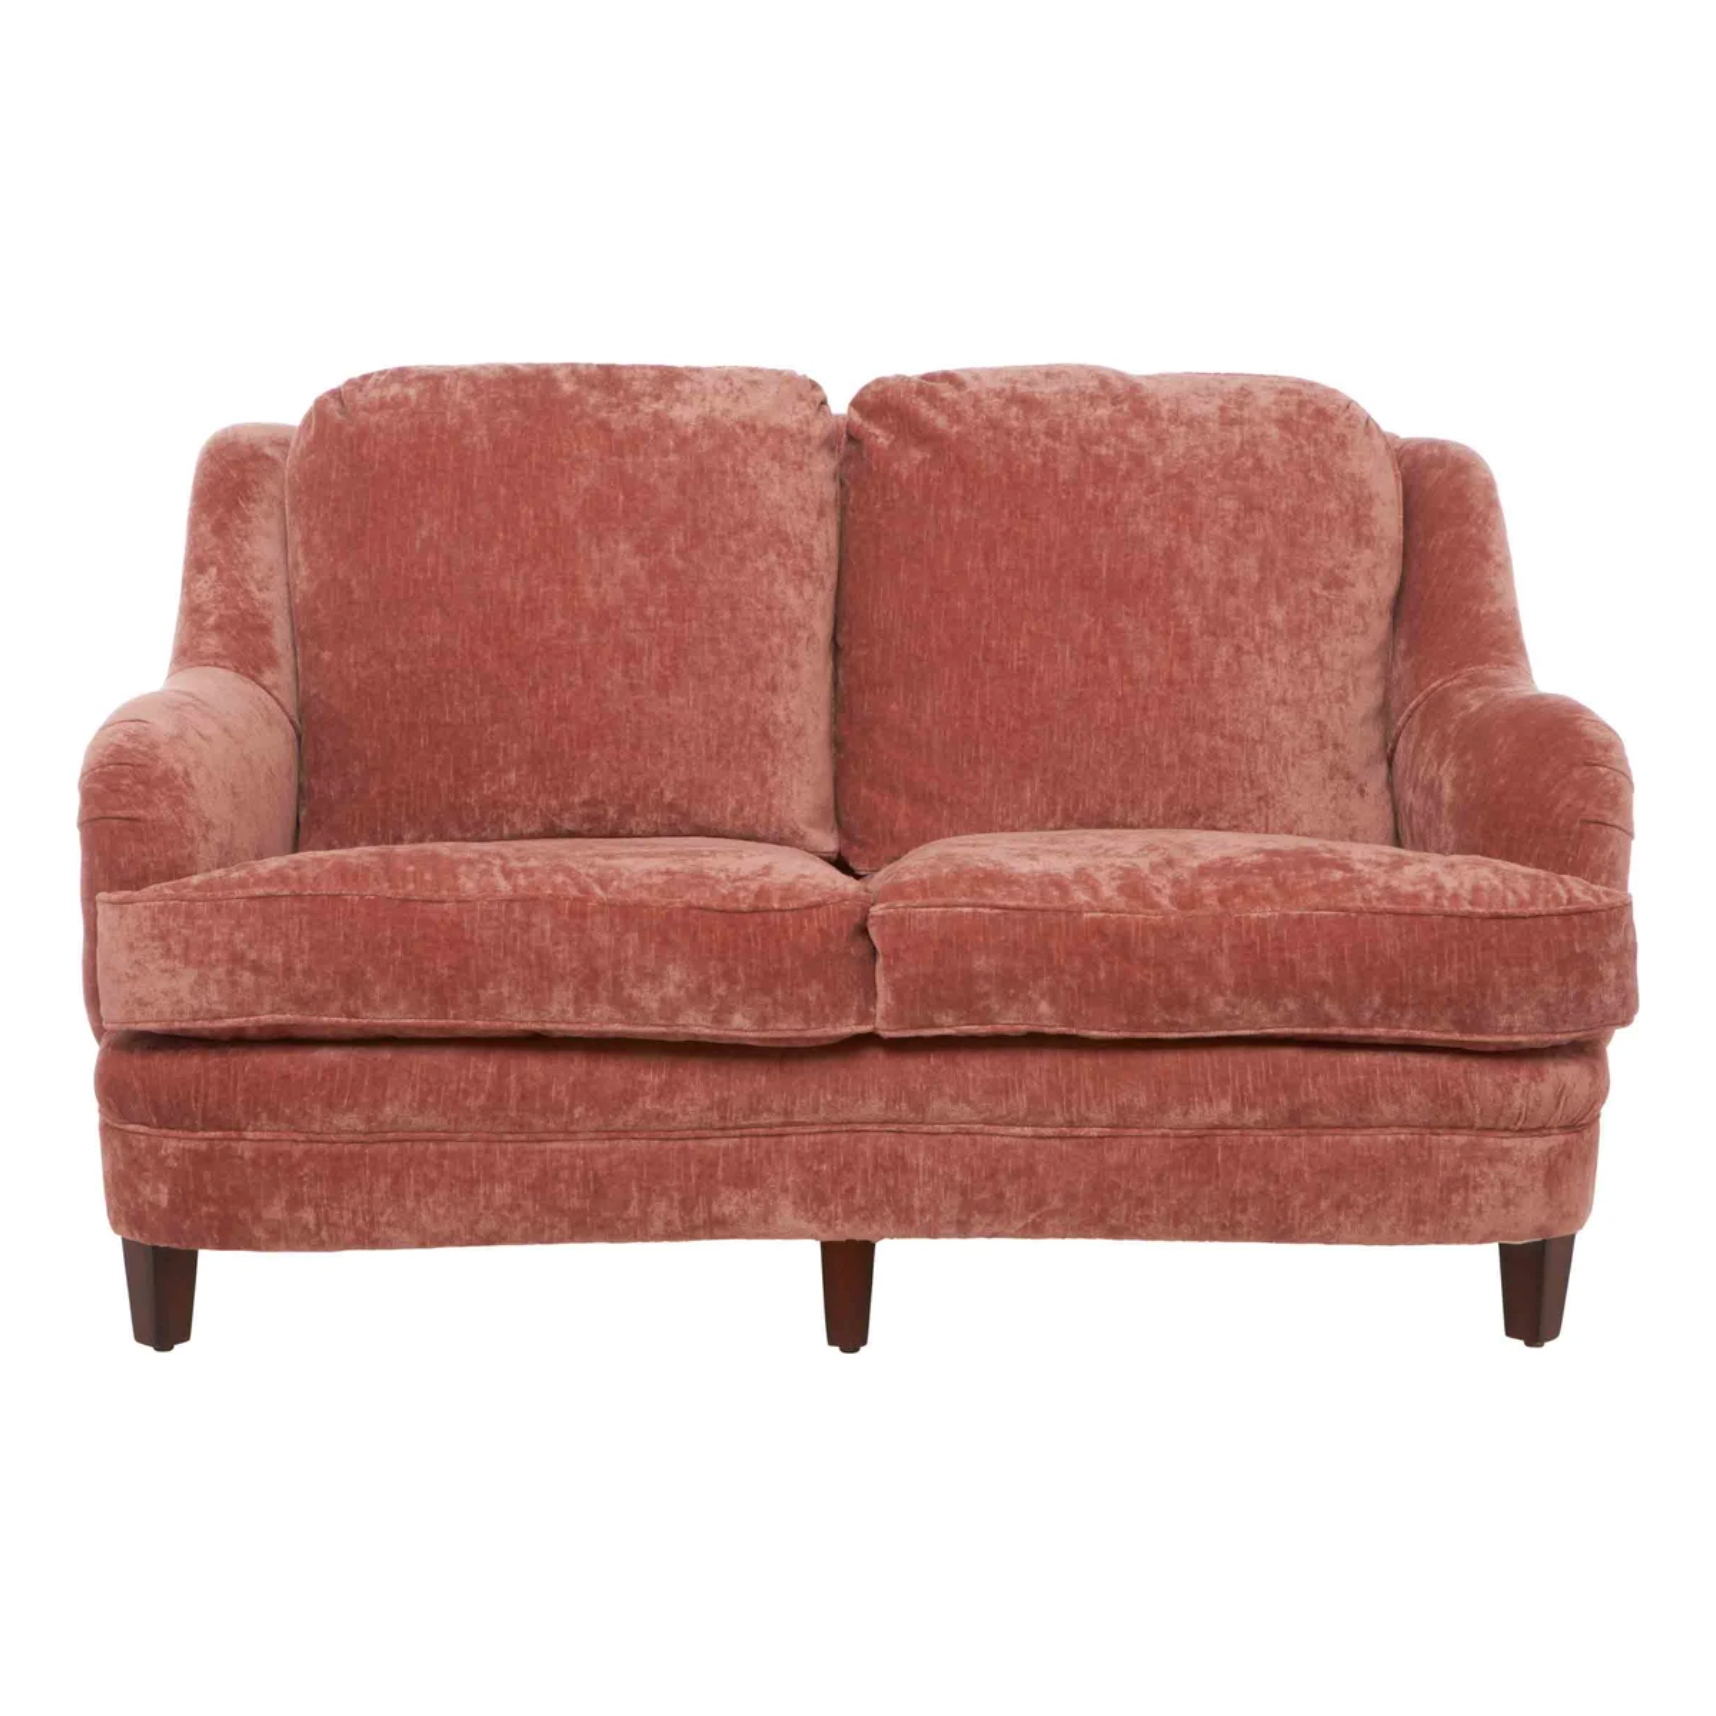 With a petite structure and curved arms, this JD Hedge 52" Loveseat by Cisco Home will be your new favorite place to snuggle with a good book and a warm drink. We'd love to see this featured in your living room, study, or other space!  Overall: 52"W x 30"H x 40"D